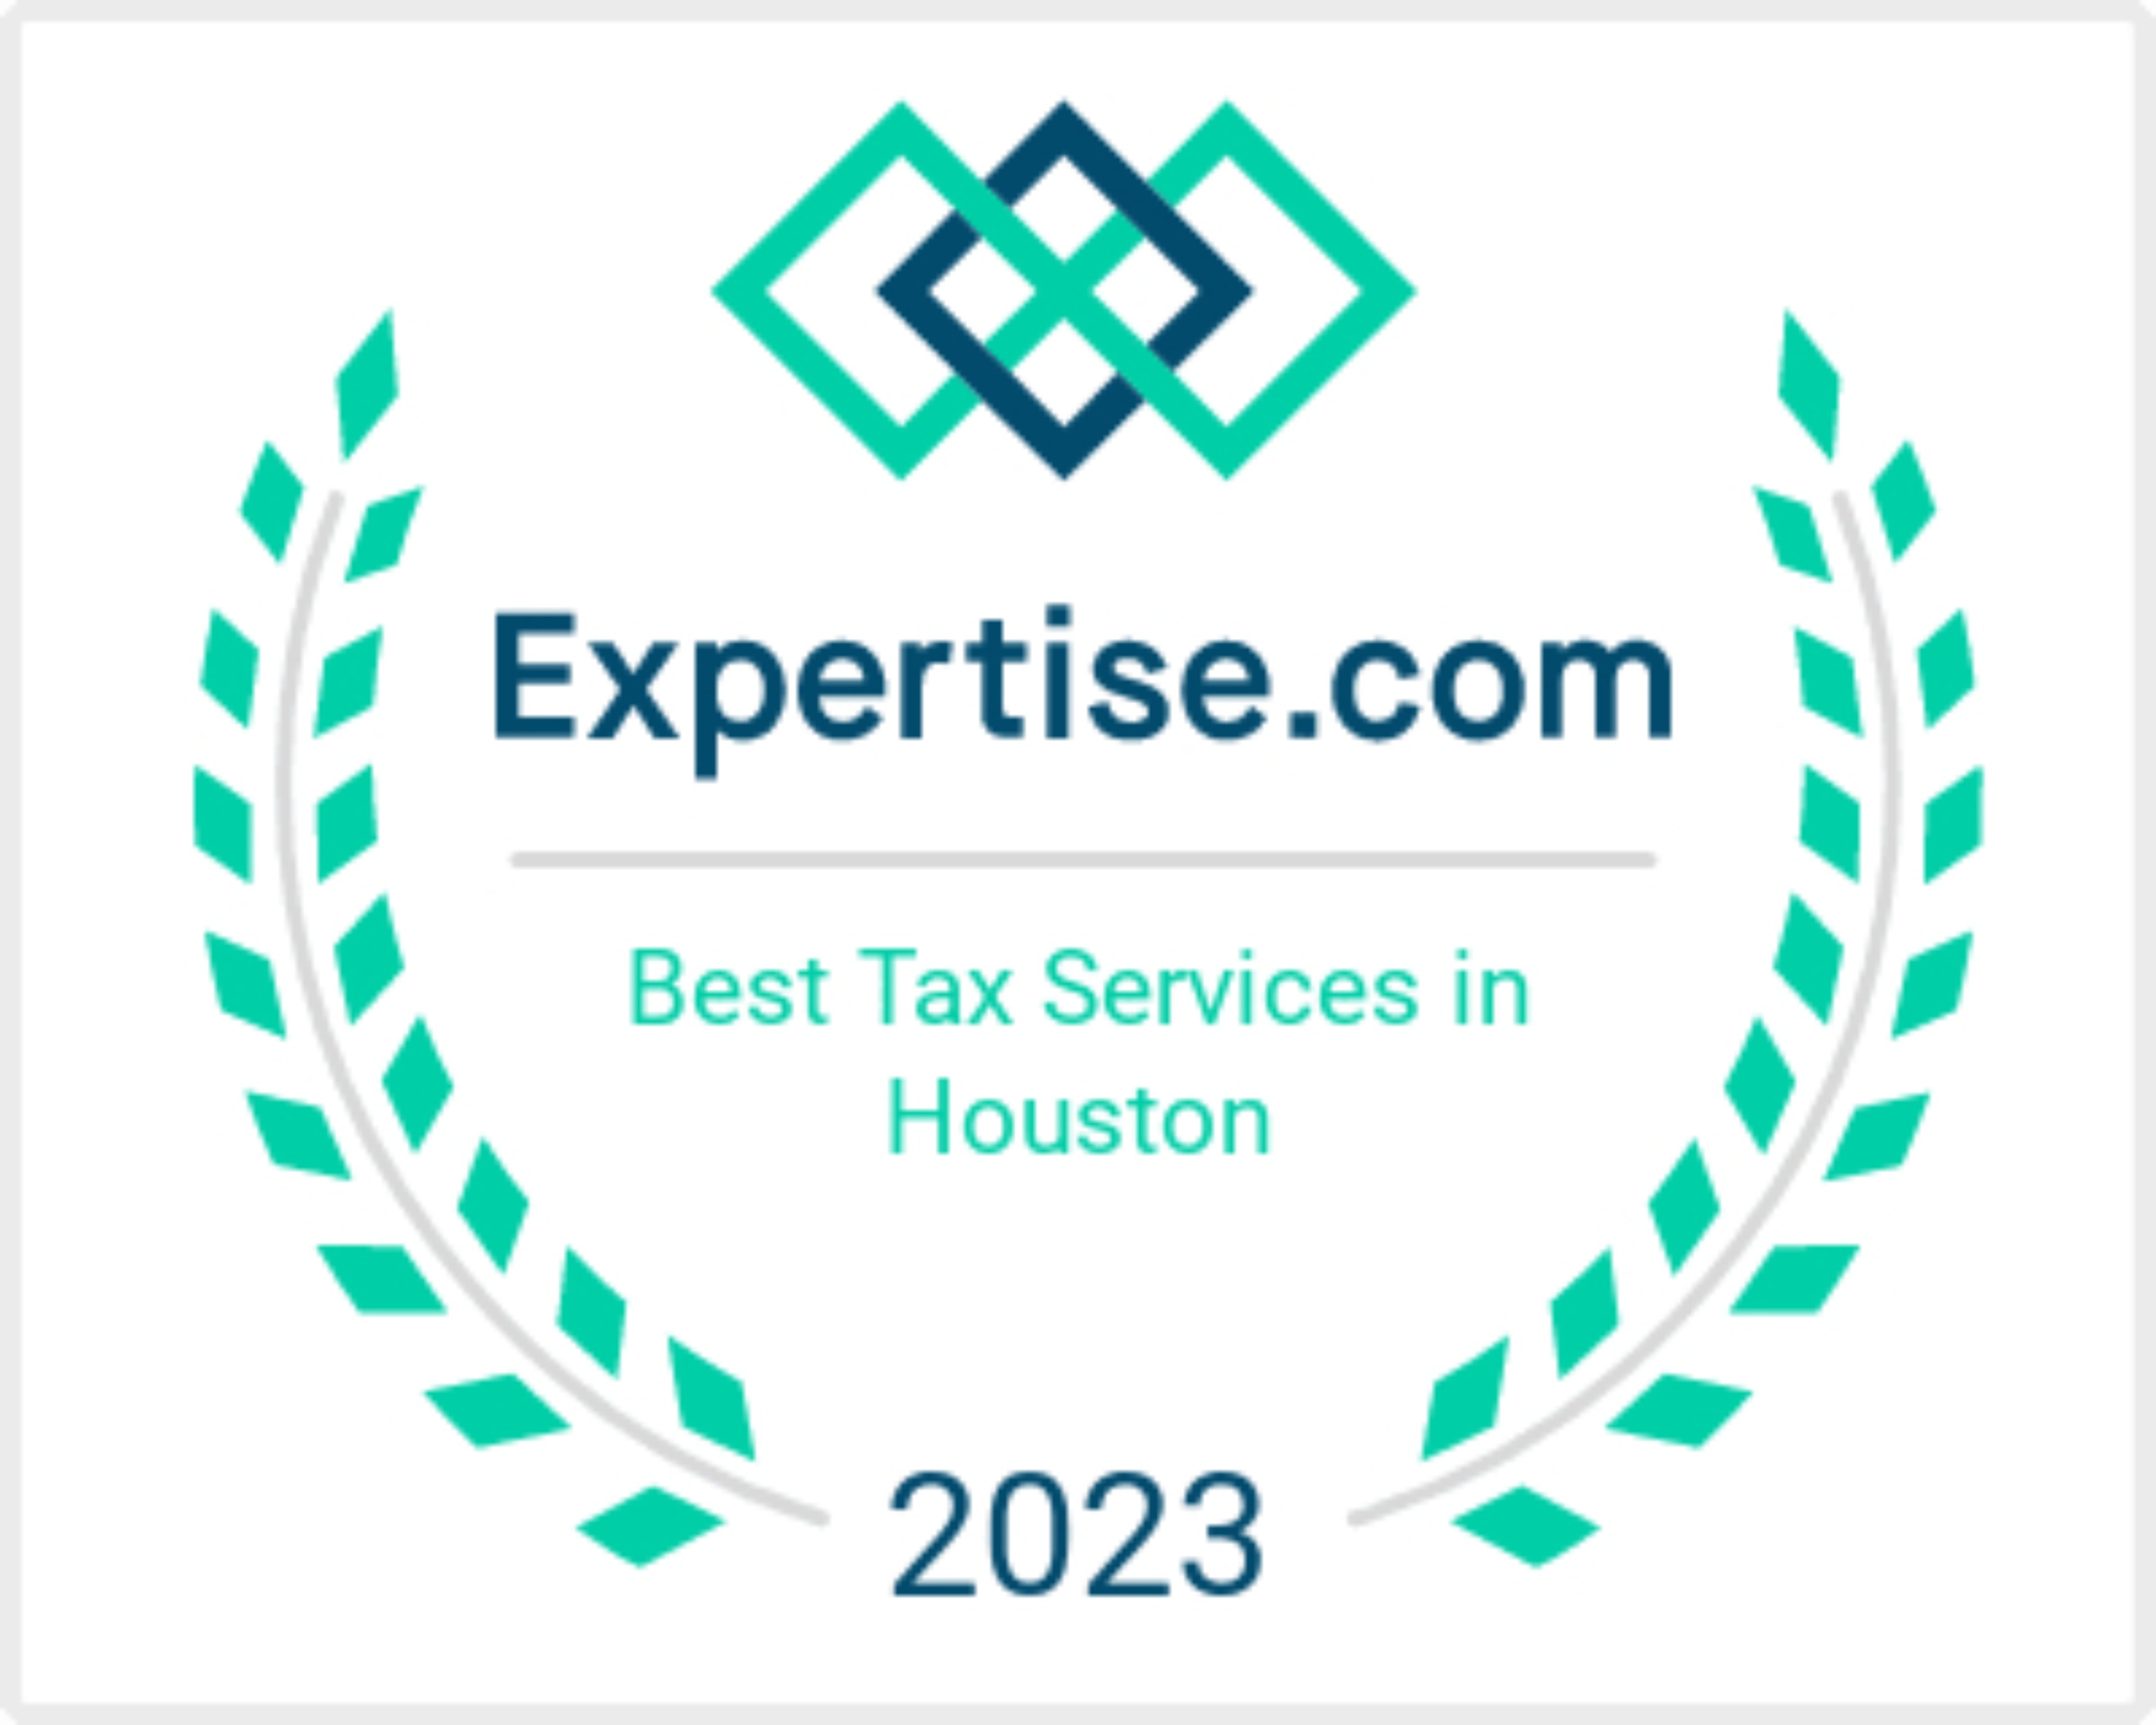 2023 Best Tax Services Awards - Expertise.com